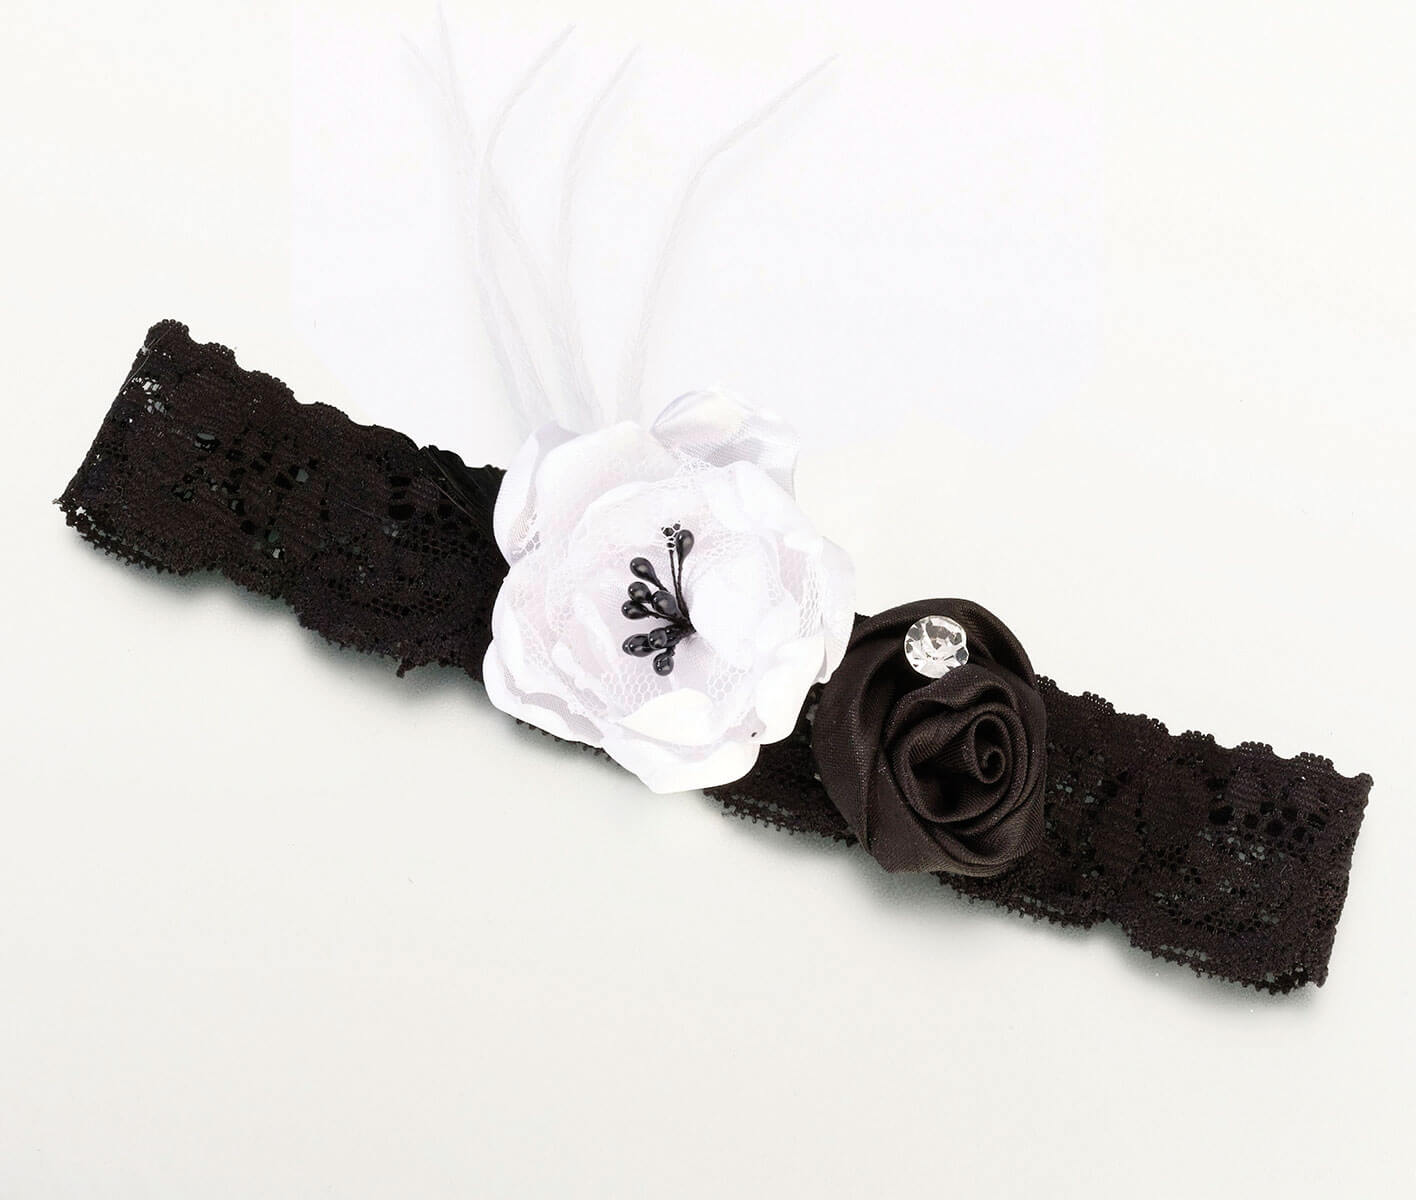 Vintage Lace Black and White Garter